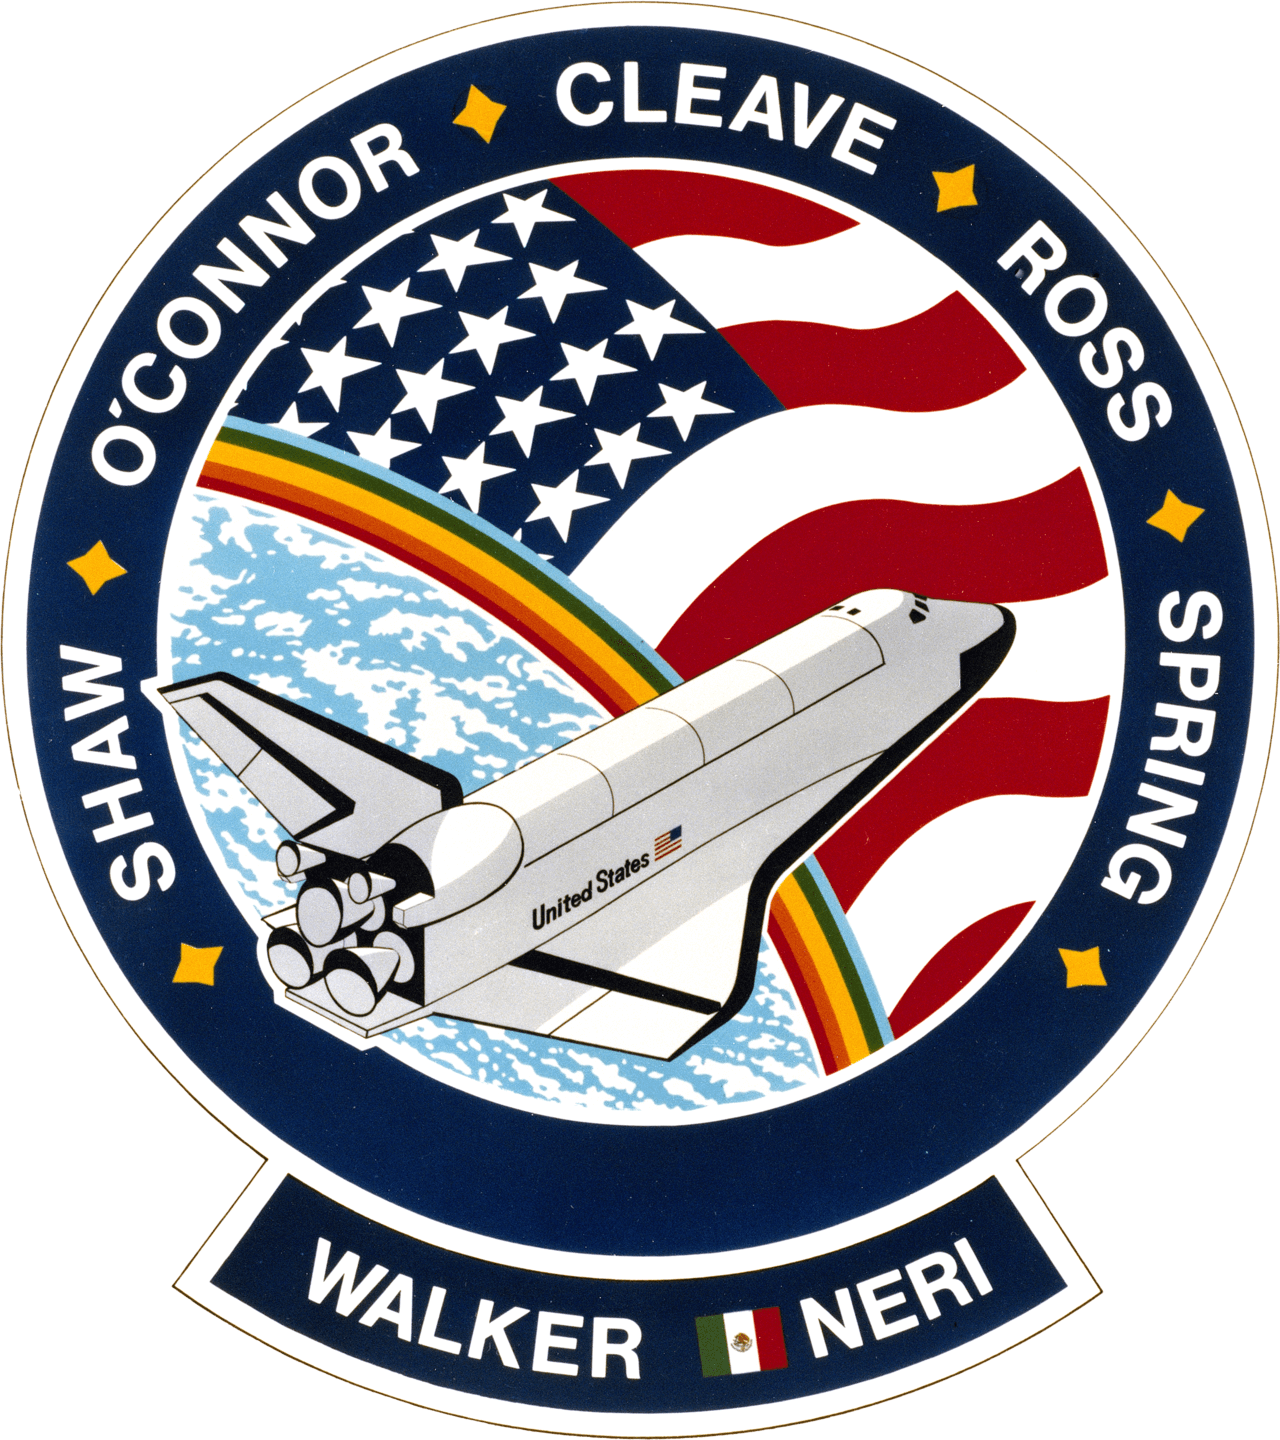 Mission patch for STS-61-B